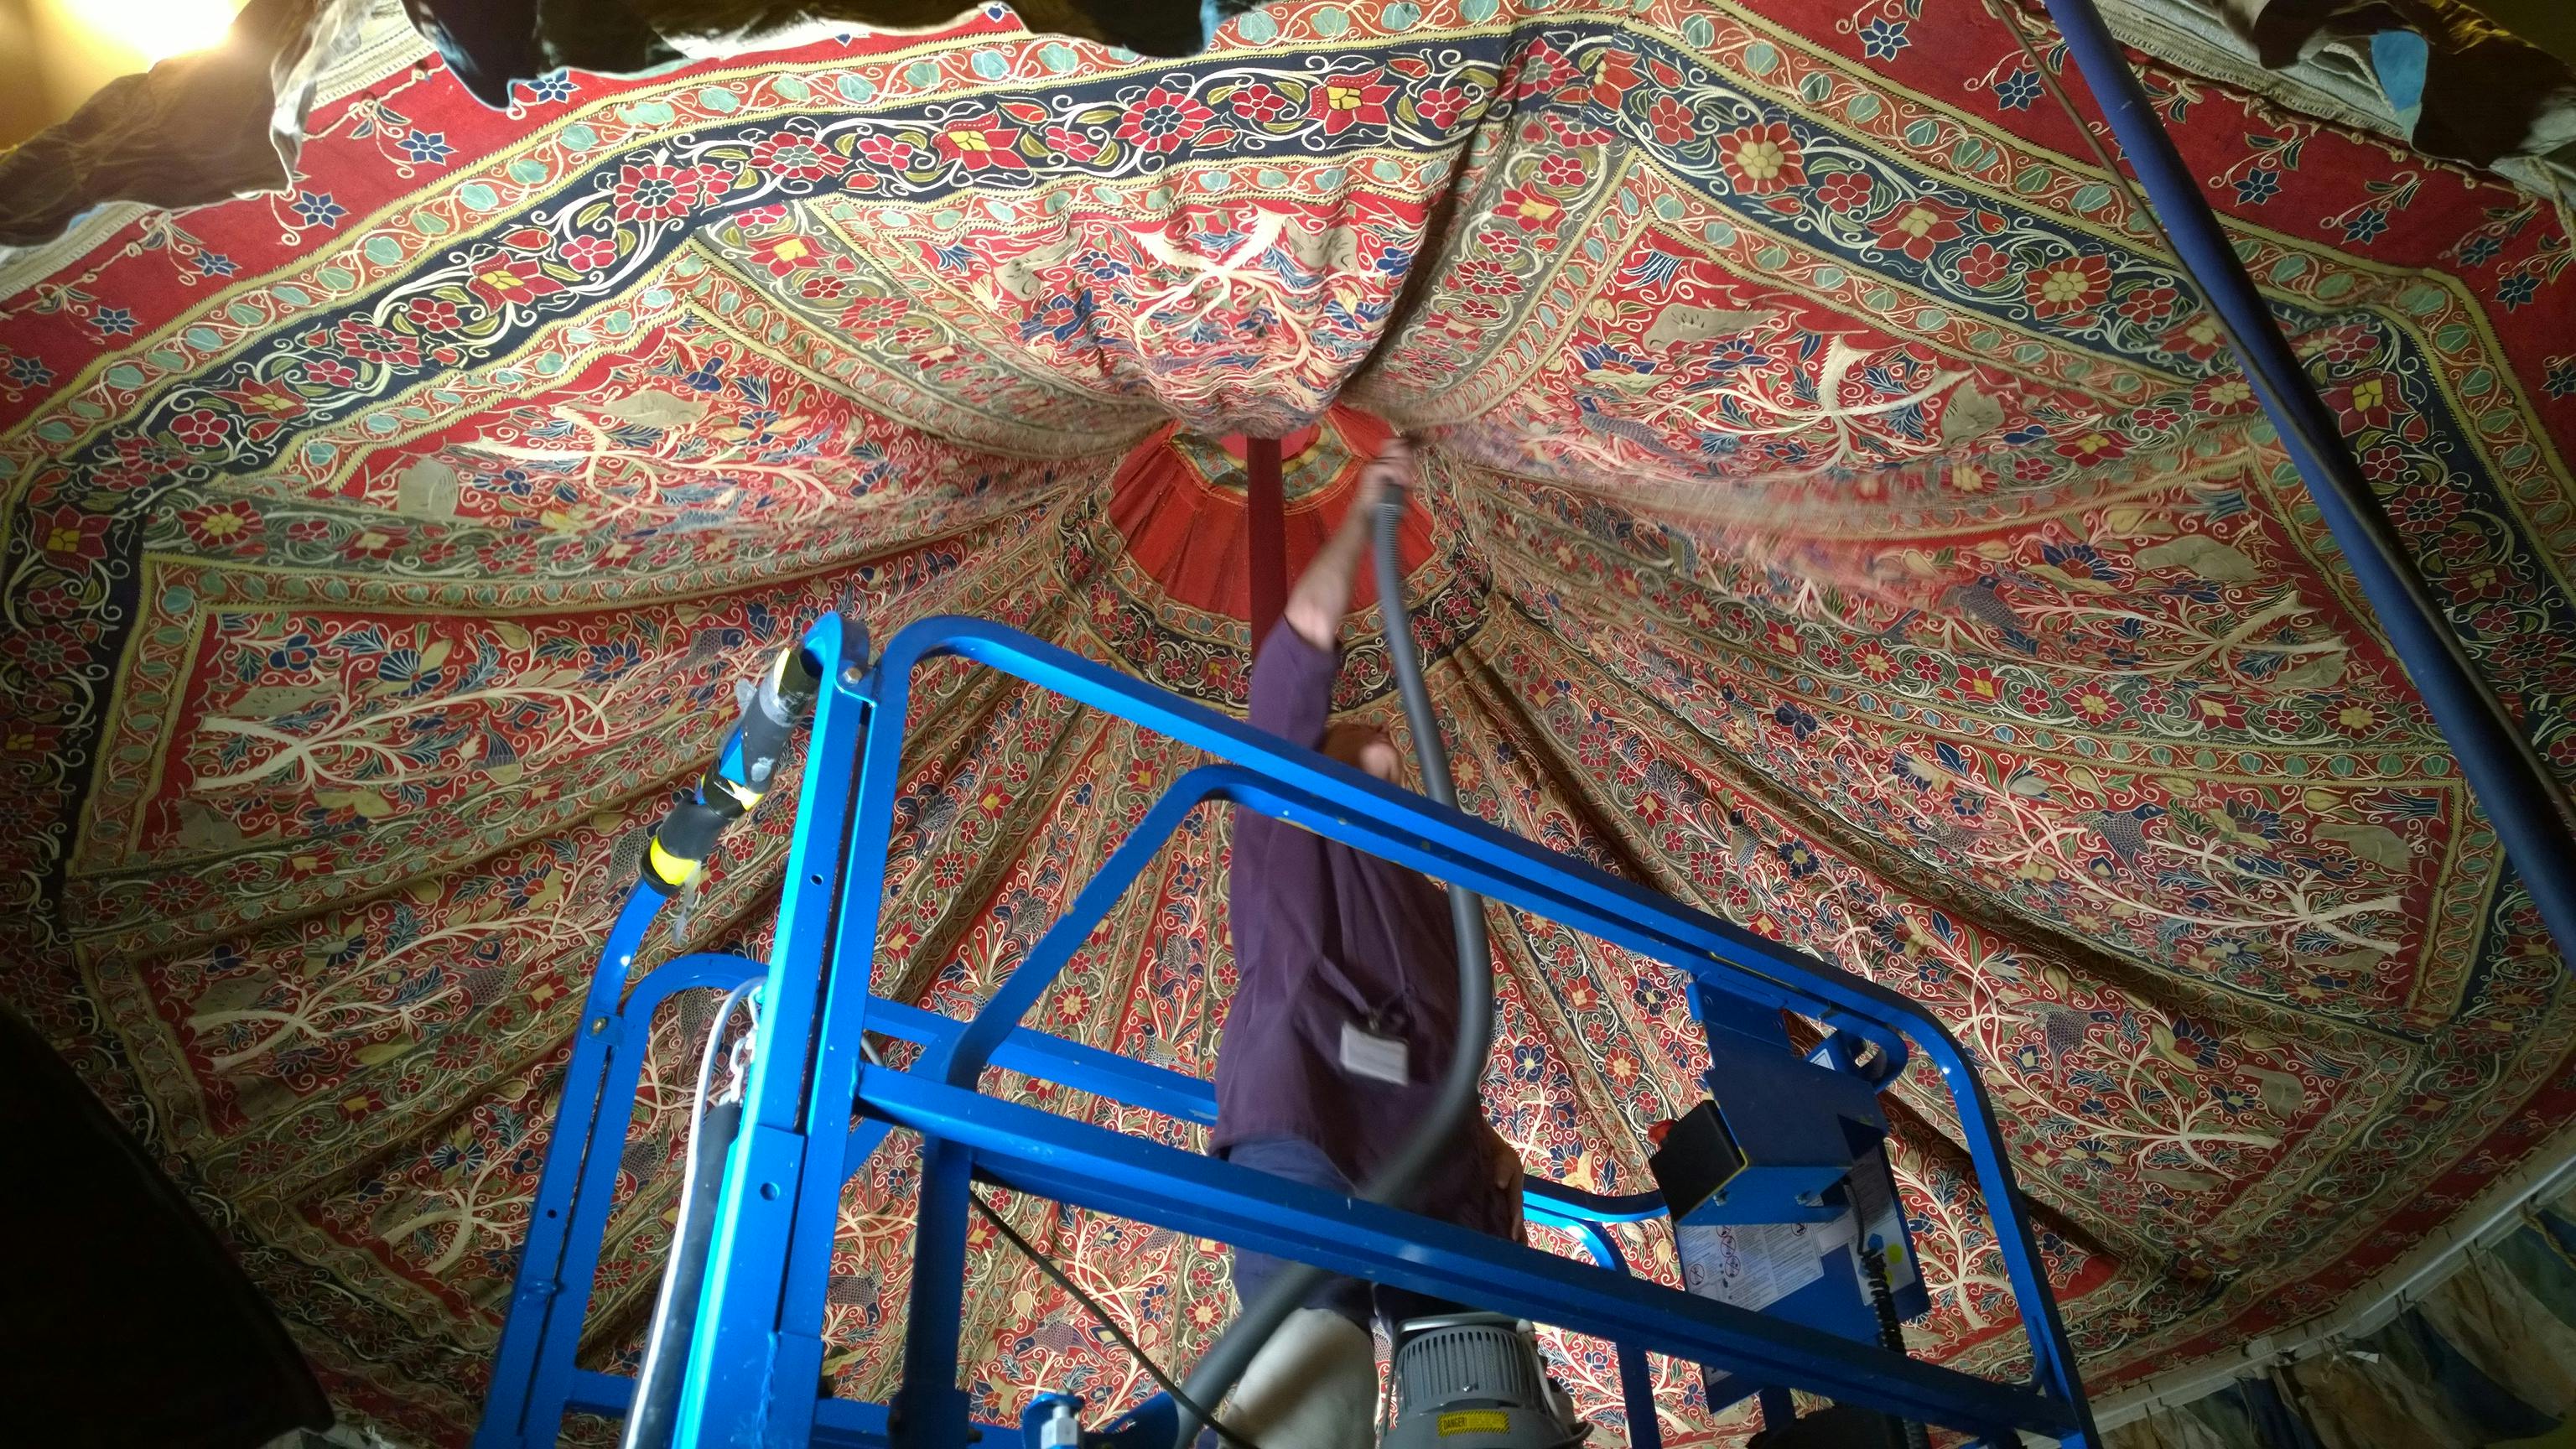 Robin Hanson, conservator of textiles, vacuuming the inside of a Qajar tent